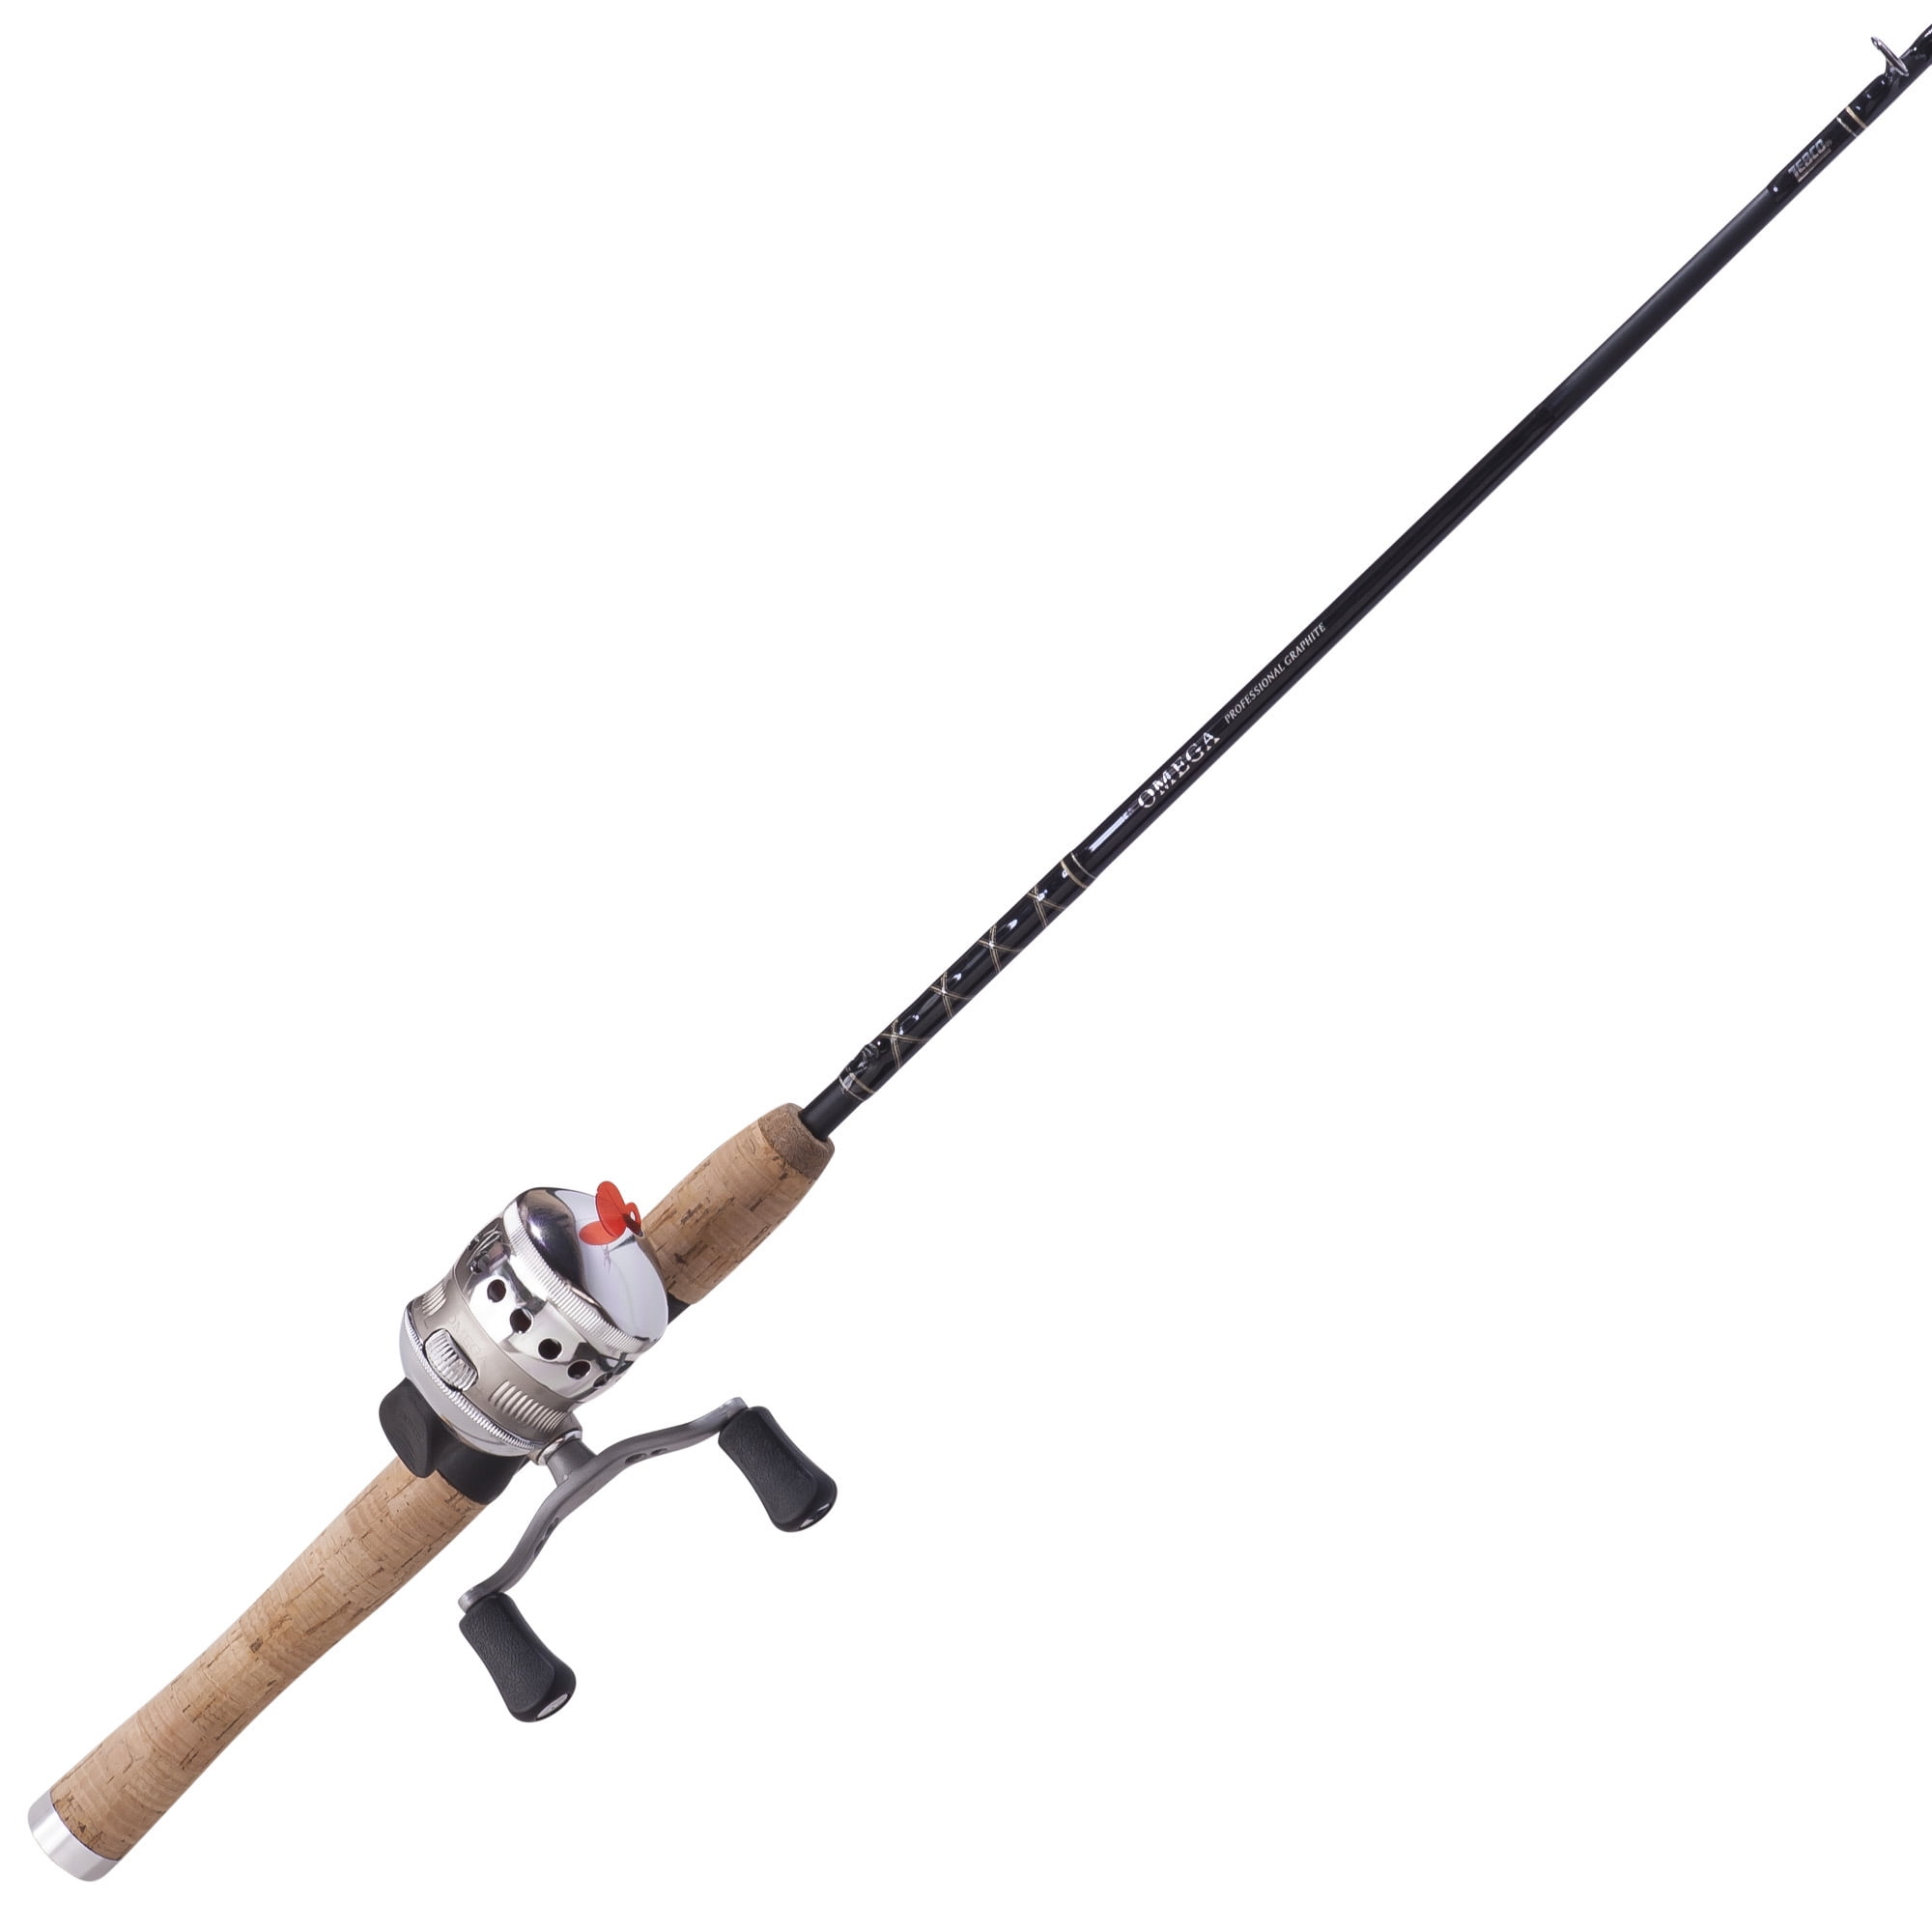 Zebco Omega Spincast Reel and Fishing Rod Combo, 6-Foot 1-Piece IM6  Graphite Fishing Pole, Natural Cork Rod Handle, Size 30 Reel, Pre-spooled  with 10-pound Zebco Line, Silver 